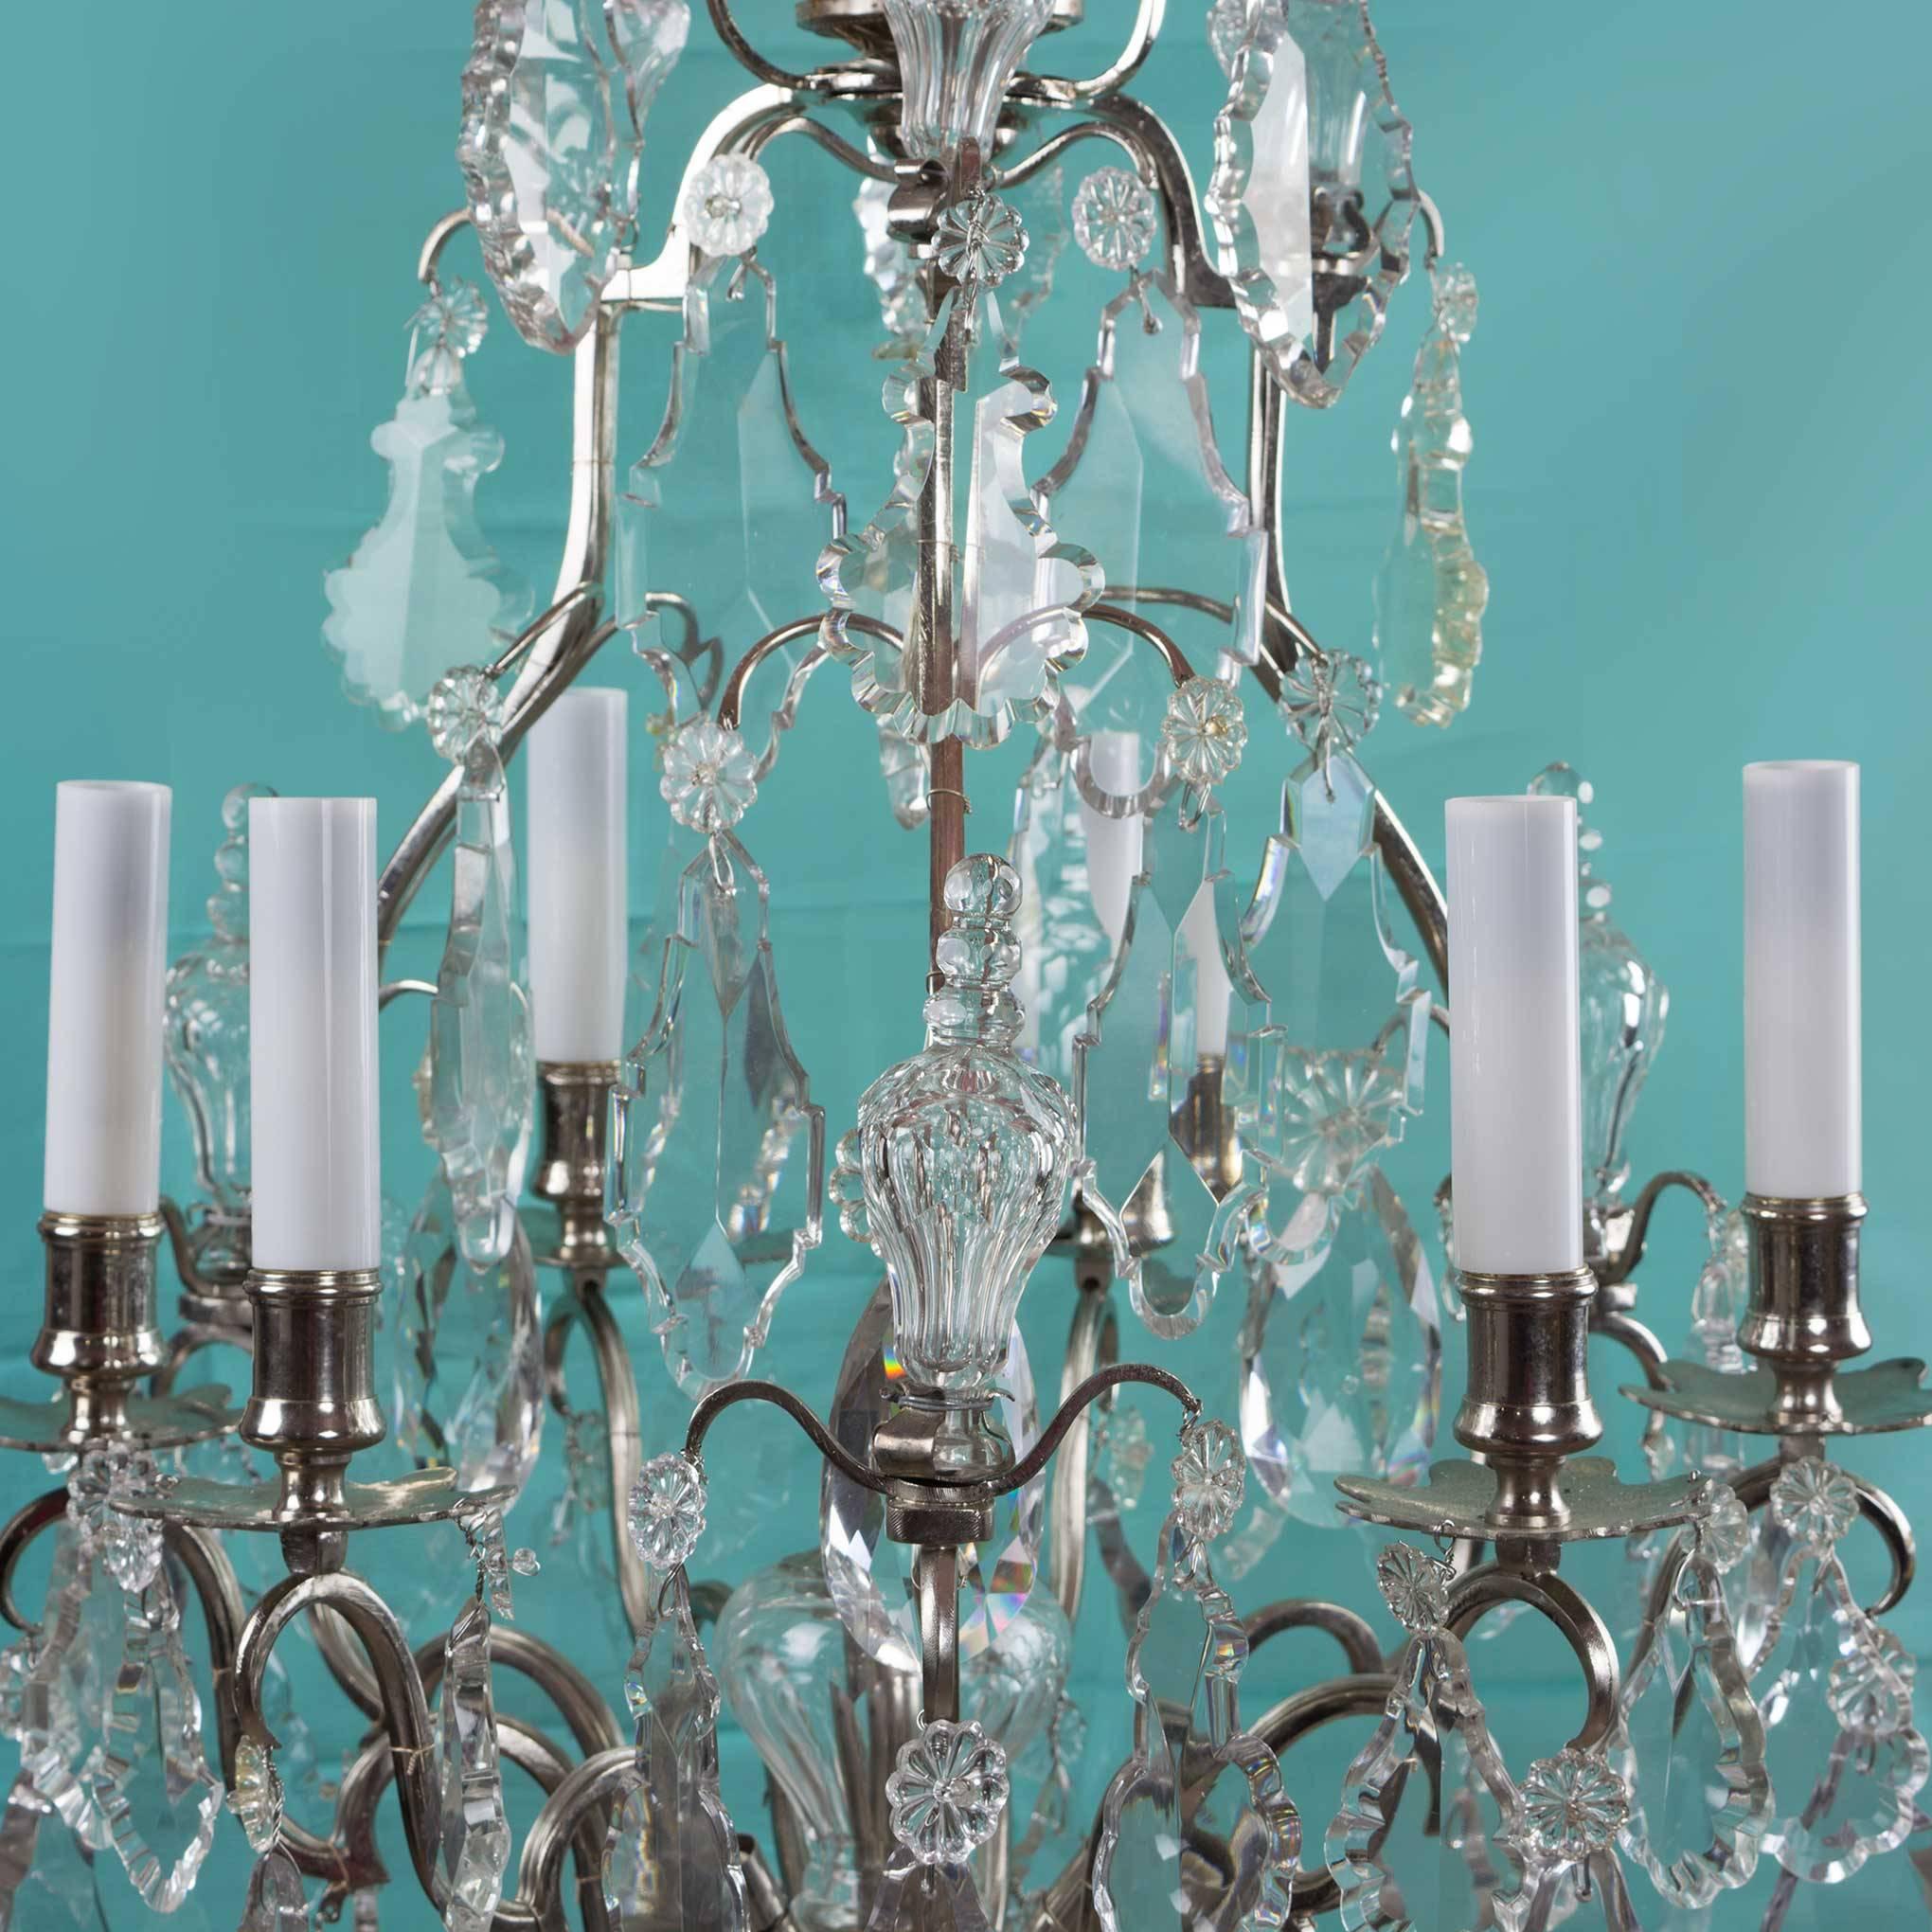 With a thousand gleaming shafts of light, this gracious Baccarat style chandelier infuses a room with incandescent elegance. Still as awe inspiring as the day it left the original Lorraine glassworks in eastern France, 150 years ago, it has since